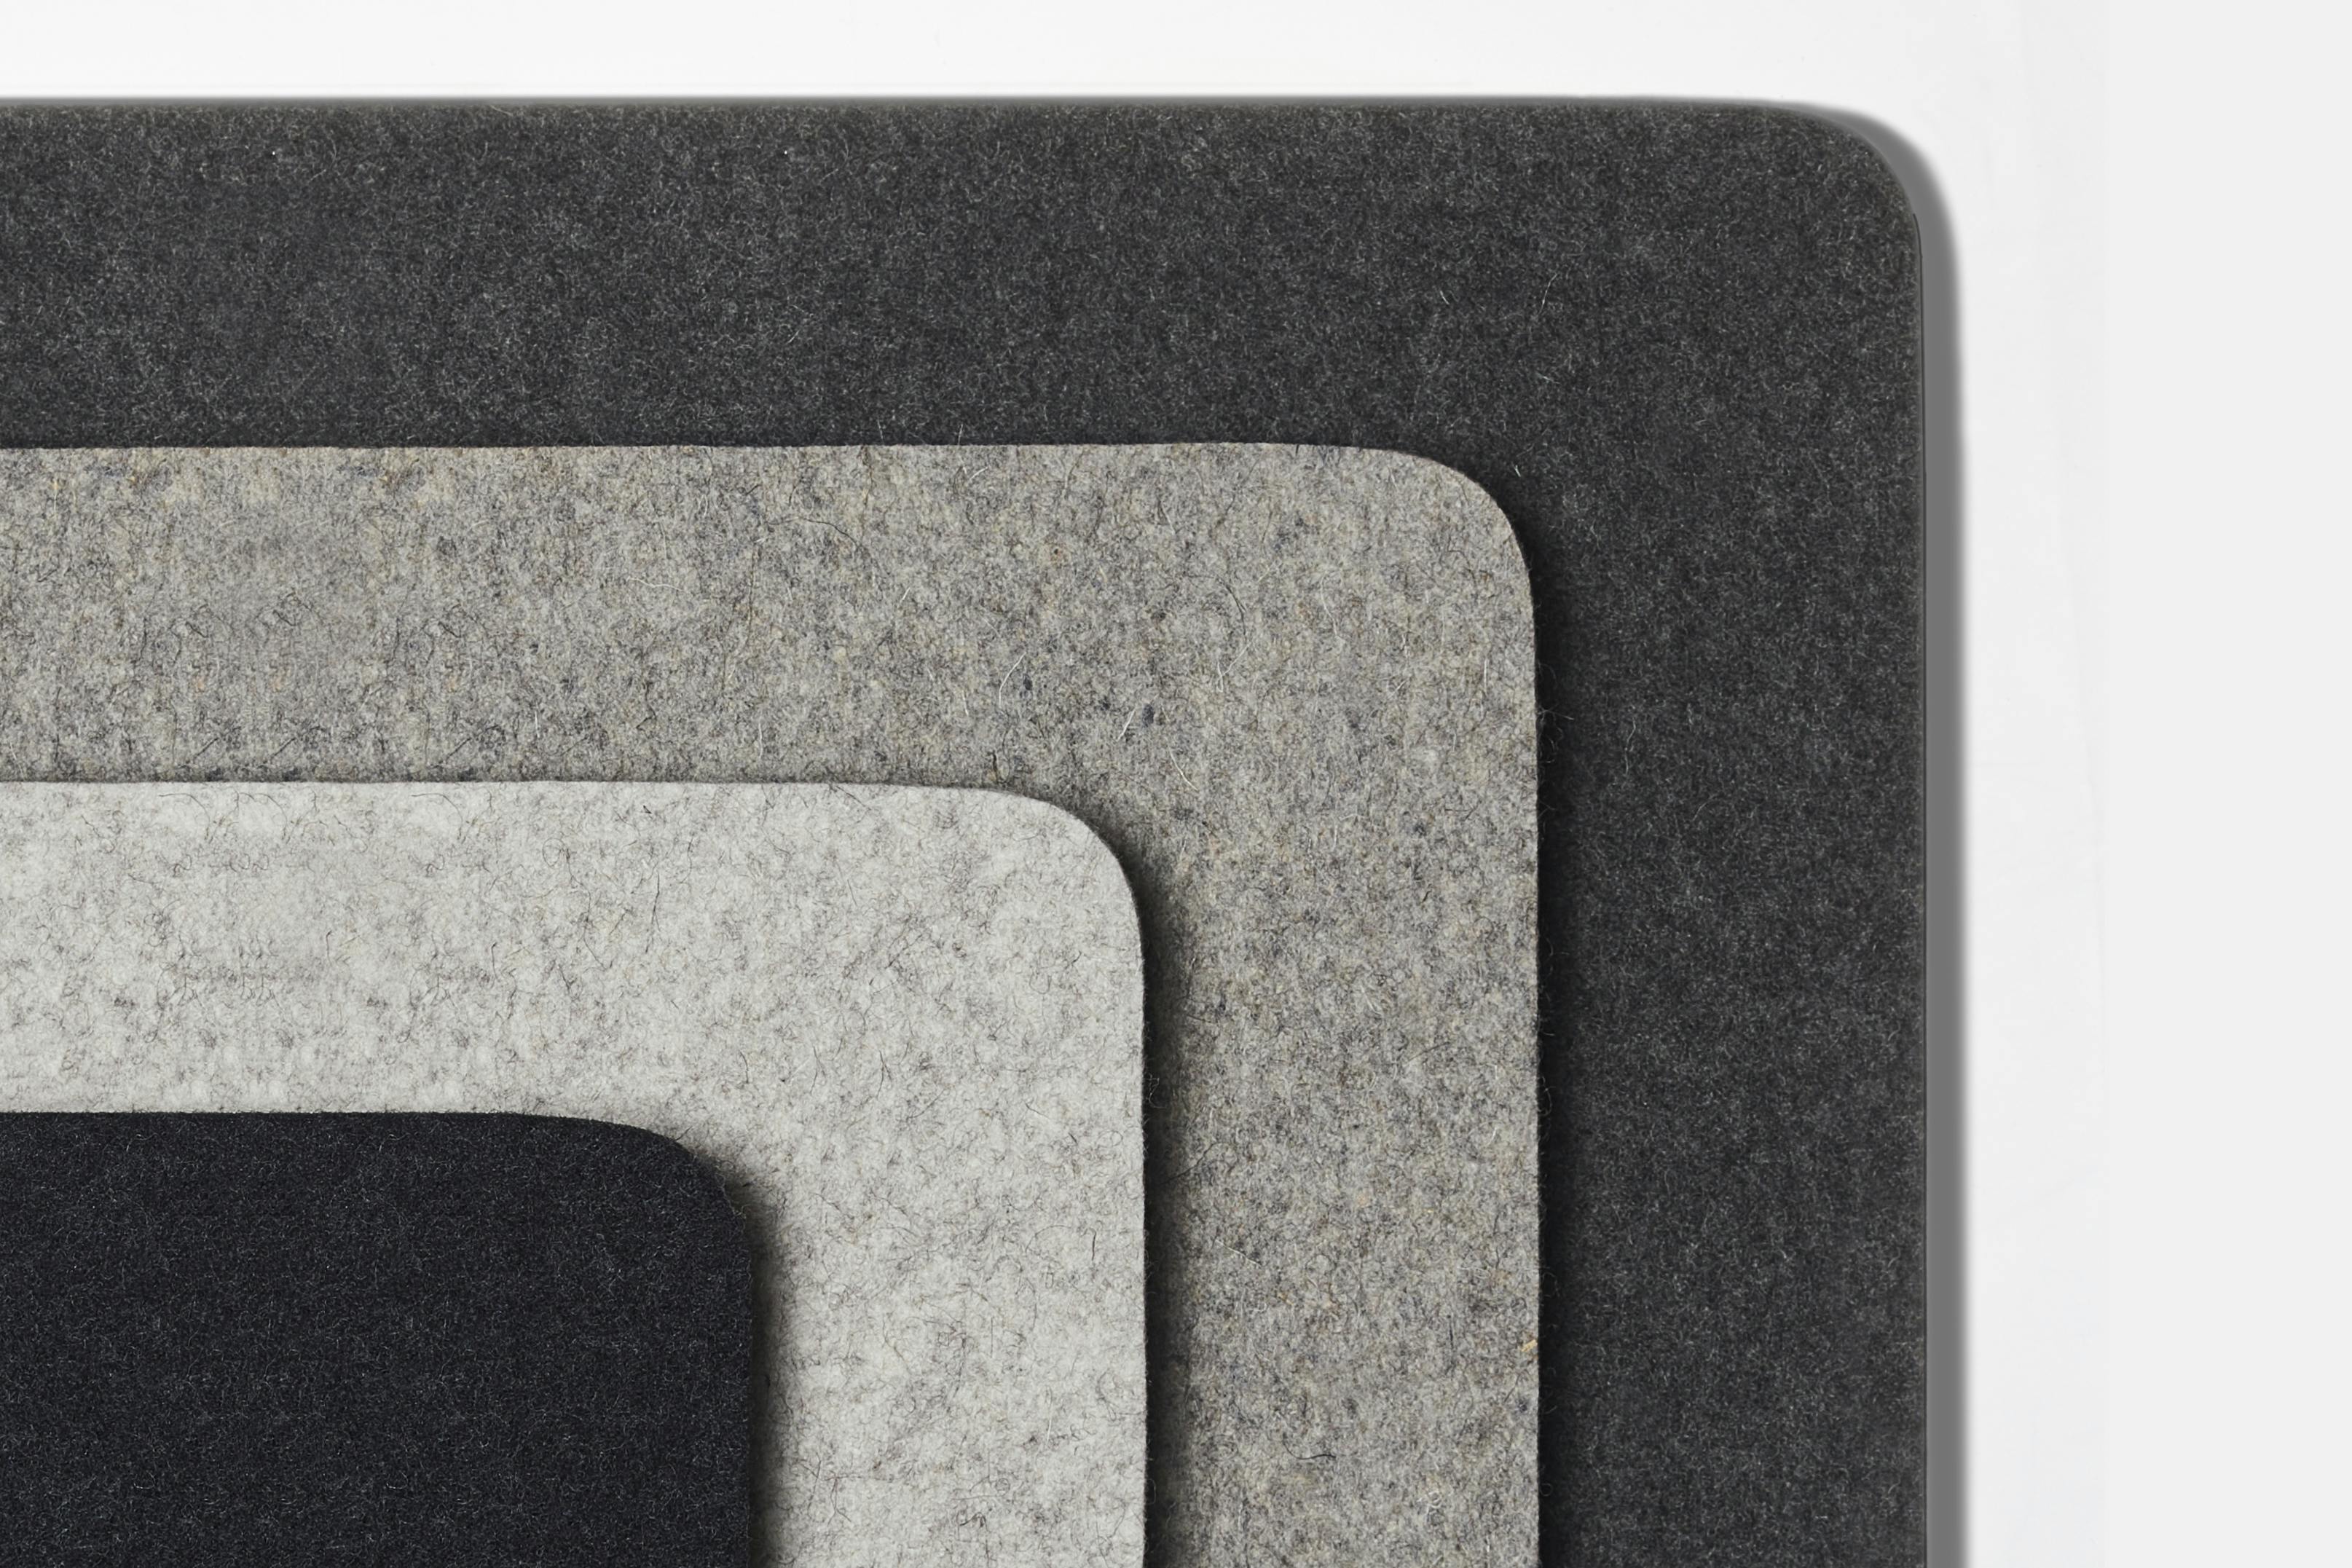 PDP Image: Felt Tops (The Nightstand / Thunderstorm) - 3:2 - Four Stacked